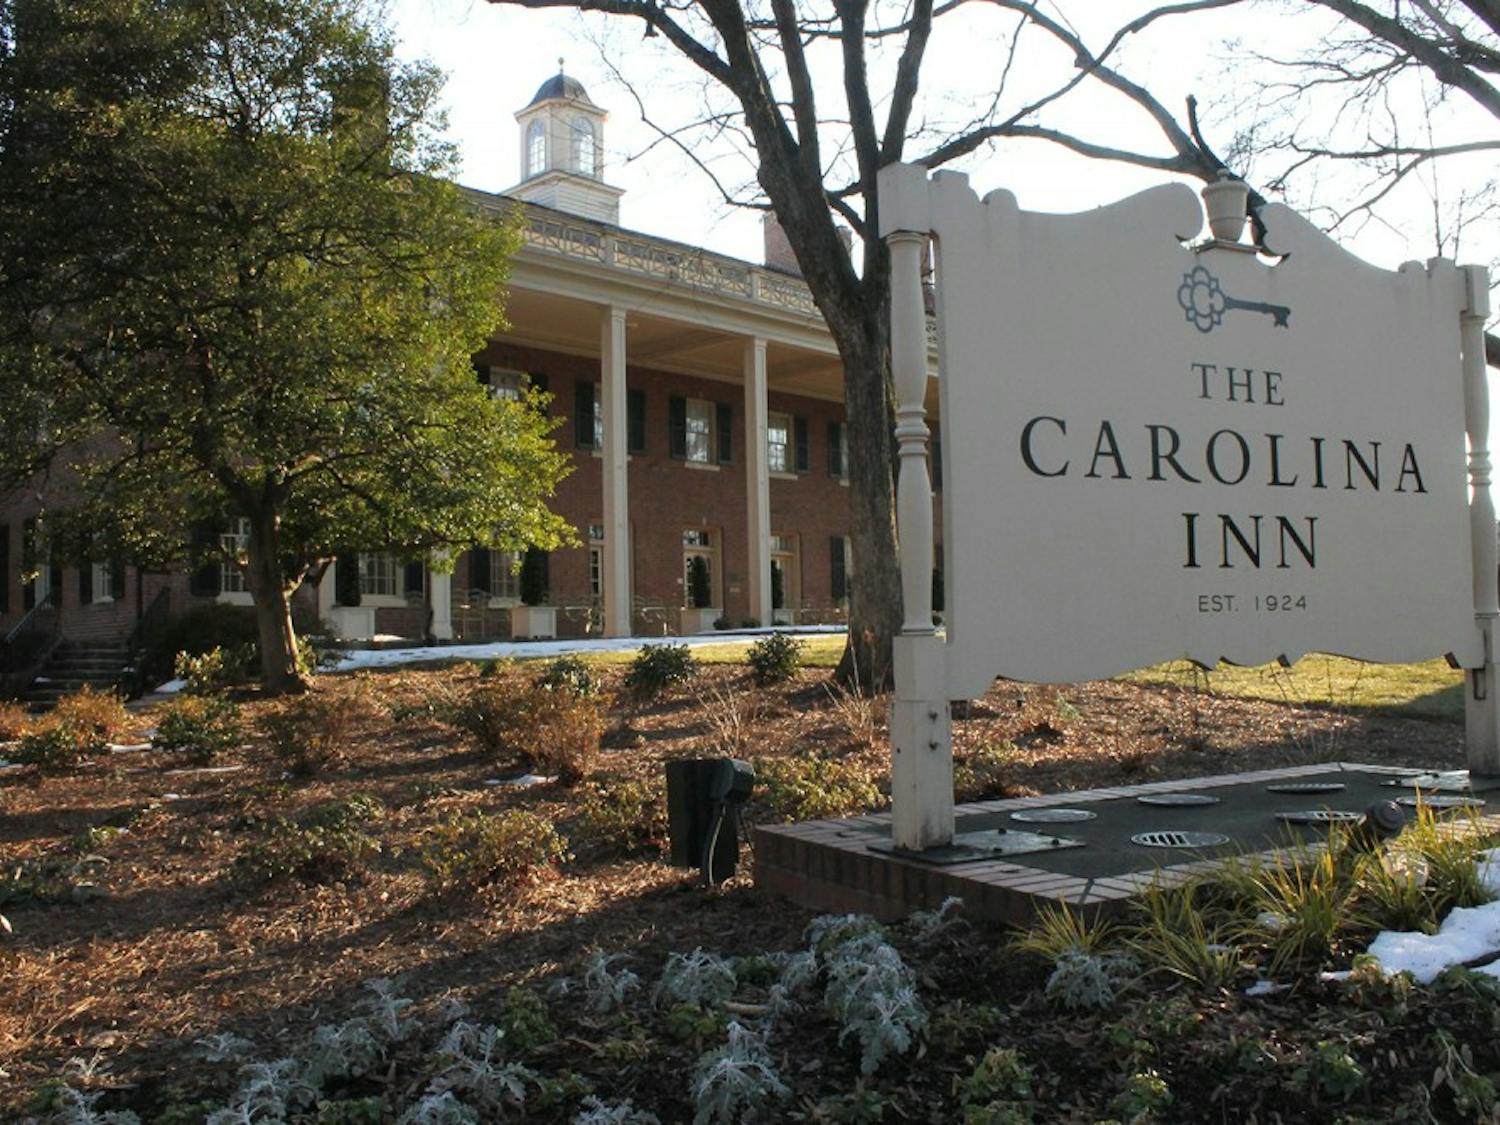 Popular hotels in the Chapel Hill area like the Carolina Inn and Franklin Hotel are booked to capacity for the rescheduled UNC vs Carolina basketball game on Thursday, February 20, 2014. Ticket holders face long wait lists and hotel referrals.